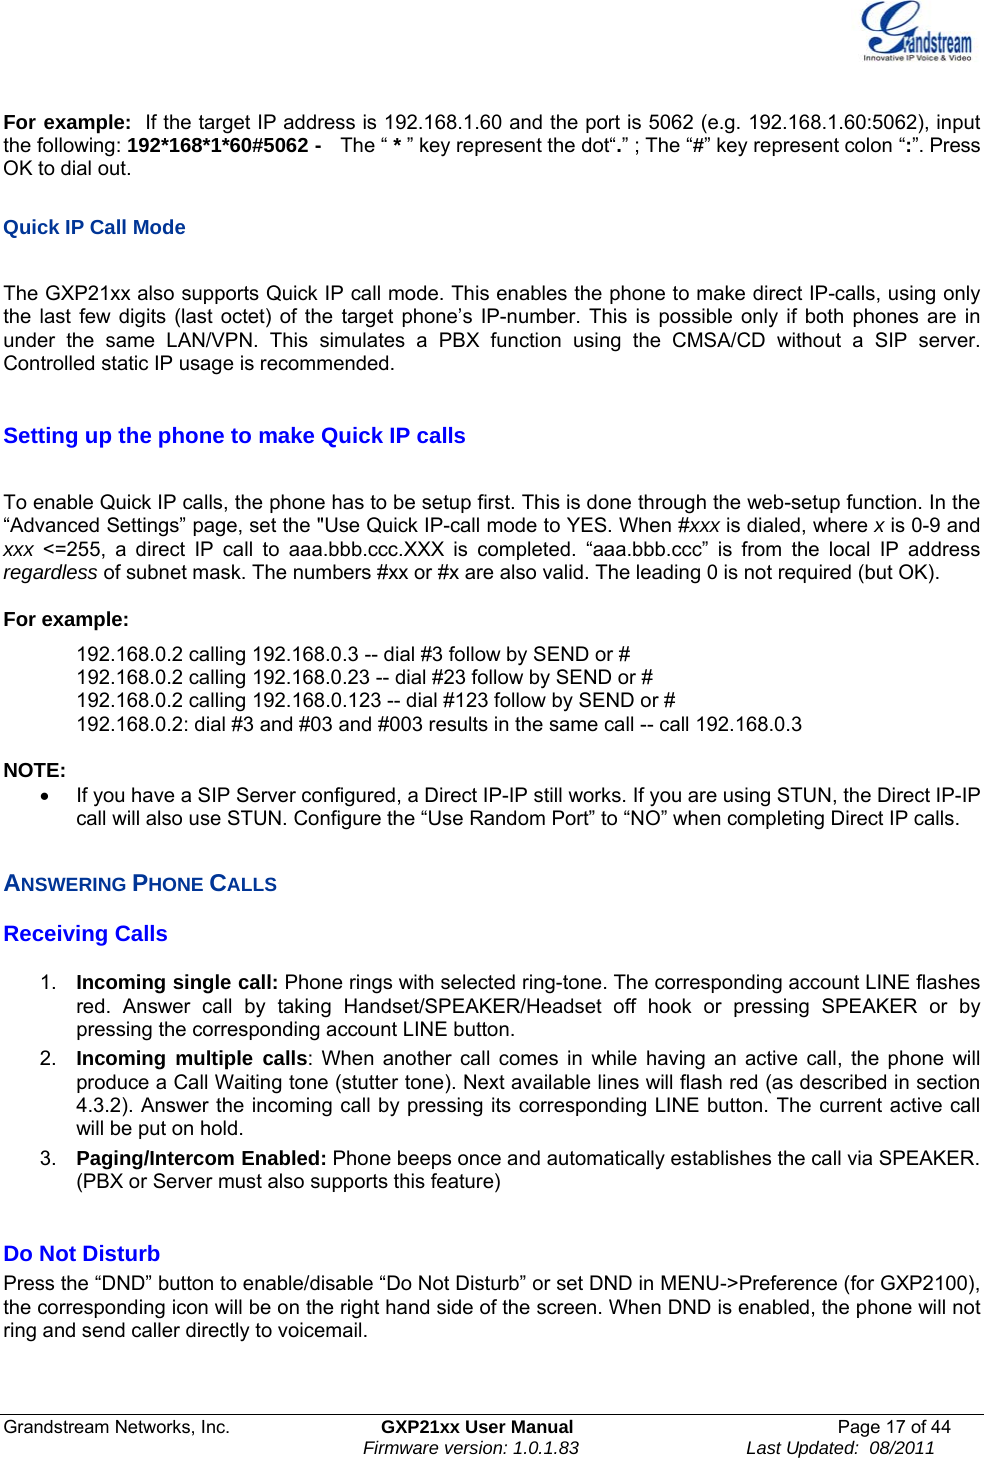  Grandstream Networks, Inc.  GXP21xx User Manual  Page 17 of 44                                                                Firmware version: 1.0.1.83                                 Last Updated:  08/2011  For example:  If the target IP address is 192.168.1.60 and the port is 5062 (e.g. 192.168.1.60:5062), input the following: 192*168*1*60#5062 -   The “ * ” key represent the dot“.” ; The “#” key represent colon “:”. Press OK to dial out.  Quick IP Call Mode  The GXP21xx also supports Quick IP call mode. This enables the phone to make direct IP-calls, using only the last few digits (last octet) of the target phone’s IP-number. This is possible only if both phones are in under the same LAN/VPN. This simulates a PBX function using the CMSA/CD without a SIP server. Controlled static IP usage is recommended.   Setting up the phone to make Quick IP calls  To enable Quick IP calls, the phone has to be setup first. This is done through the web-setup function. In the “Advanced Settings” page, set the &quot;Use Quick IP-call mode to YES. When #xxx is dialed, where x is 0-9 and xxx &lt;=255, a direct IP call to aaa.bbb.ccc.XXX is completed. “aaa.bbb.ccc” is from the local IP address regardless of subnet mask. The numbers #xx or #x are also valid. The leading 0 is not required (but OK).  For example:   192.168.0.2 calling 192.168.0.3 -- dial #3 follow by SEND or # 192.168.0.2 calling 192.168.0.23 -- dial #23 follow by SEND or # 192.168.0.2 calling 192.168.0.123 -- dial #123 follow by SEND or # 192.168.0.2: dial #3 and #03 and #003 results in the same call -- call 192.168.0.3  NOTE:   •  If you have a SIP Server configured, a Direct IP-IP still works. If you are using STUN, the Direct IP-IP call will also use STUN. Configure the “Use Random Port” to “NO” when completing Direct IP calls.  ANSWERING PHONE CALLS Receiving Calls  1.  Incoming single call: Phone rings with selected ring-tone. The corresponding account LINE flashes red. Answer call by taking Handset/SPEAKER/Headset off hook or pressing SPEAKER or by pressing the corresponding account LINE button.   2.  Incoming multiple calls: When another call comes in while having an active call, the phone will produce a Call Waiting tone (stutter tone). Next available lines will flash red (as described in section 4.3.2). Answer the incoming call by pressing its corresponding LINE button. The current active call will be put on hold.  3.  Paging/Intercom Enabled: Phone beeps once and automatically establishes the call via SPEAKER. (PBX or Server must also supports this feature)  Do Not Disturb Press the “DND” button to enable/disable “Do Not Disturb” or set DND in MENU-&gt;Preference (for GXP2100), the corresponding icon will be on the right hand side of the screen. When DND is enabled, the phone will not ring and send caller directly to voicemail.  